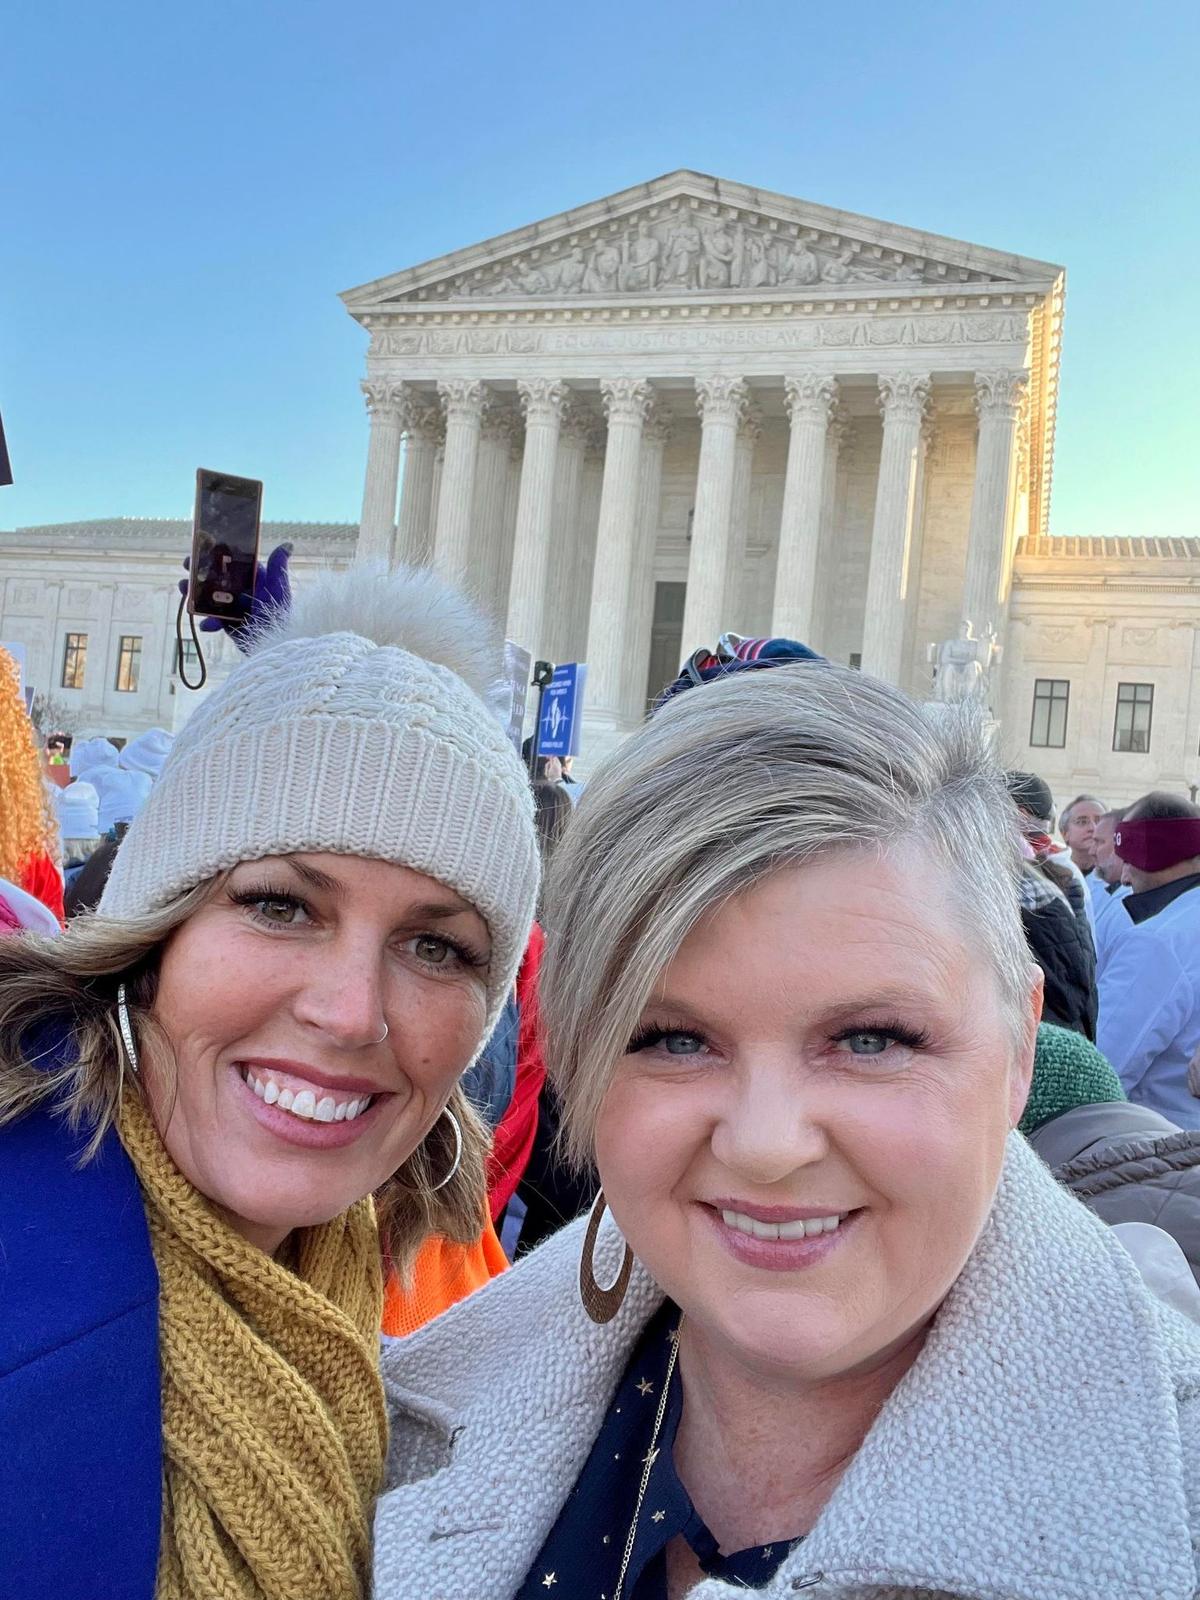 Kelly Lester (L) with ProLove Ministries’ Executive Director, Pam Whitehead, in a rally in front of the U.S. Supreme Court. (Courtesy of <a href="https://www.facebook.com/kellylesterforlife">Kelly Lester</a>)